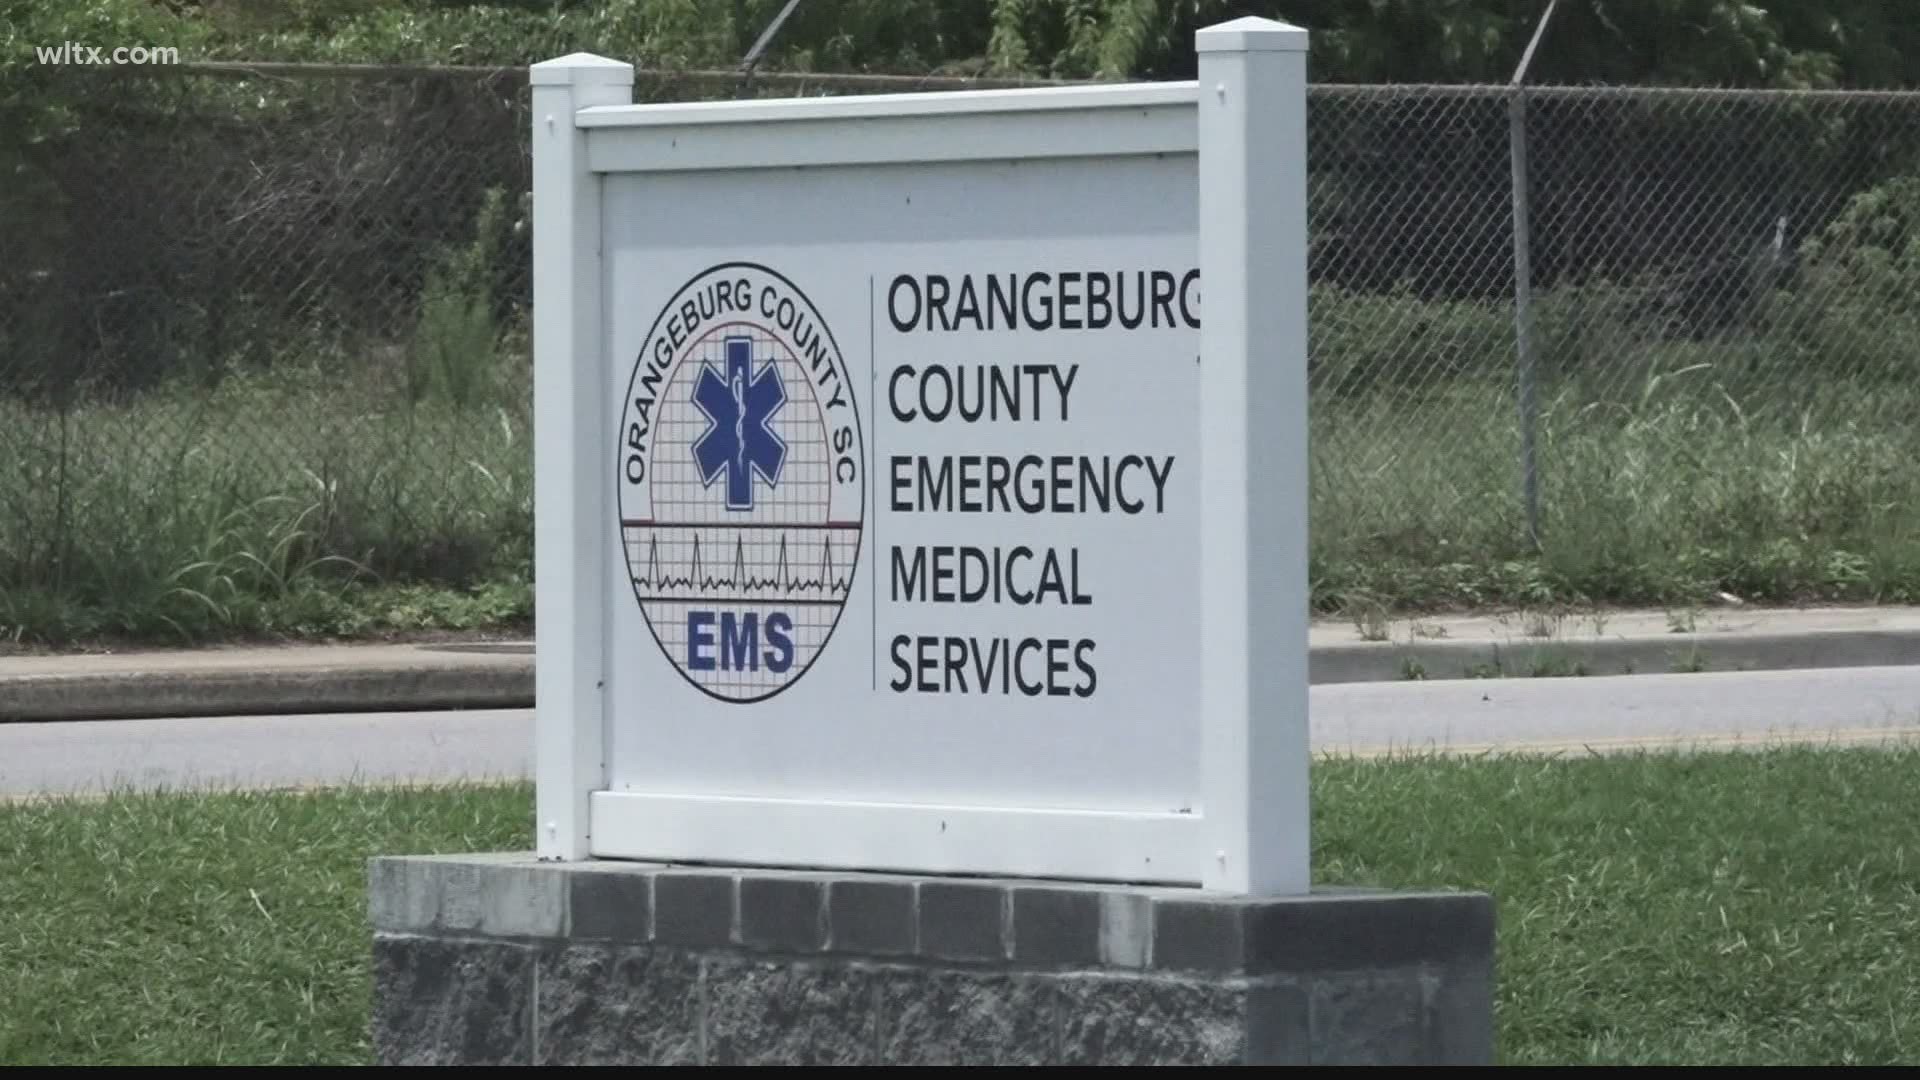 The Orangeburg County Emergency Medical Services' director believes the long criteria to become a paramedic is why people are not choosing the profession.